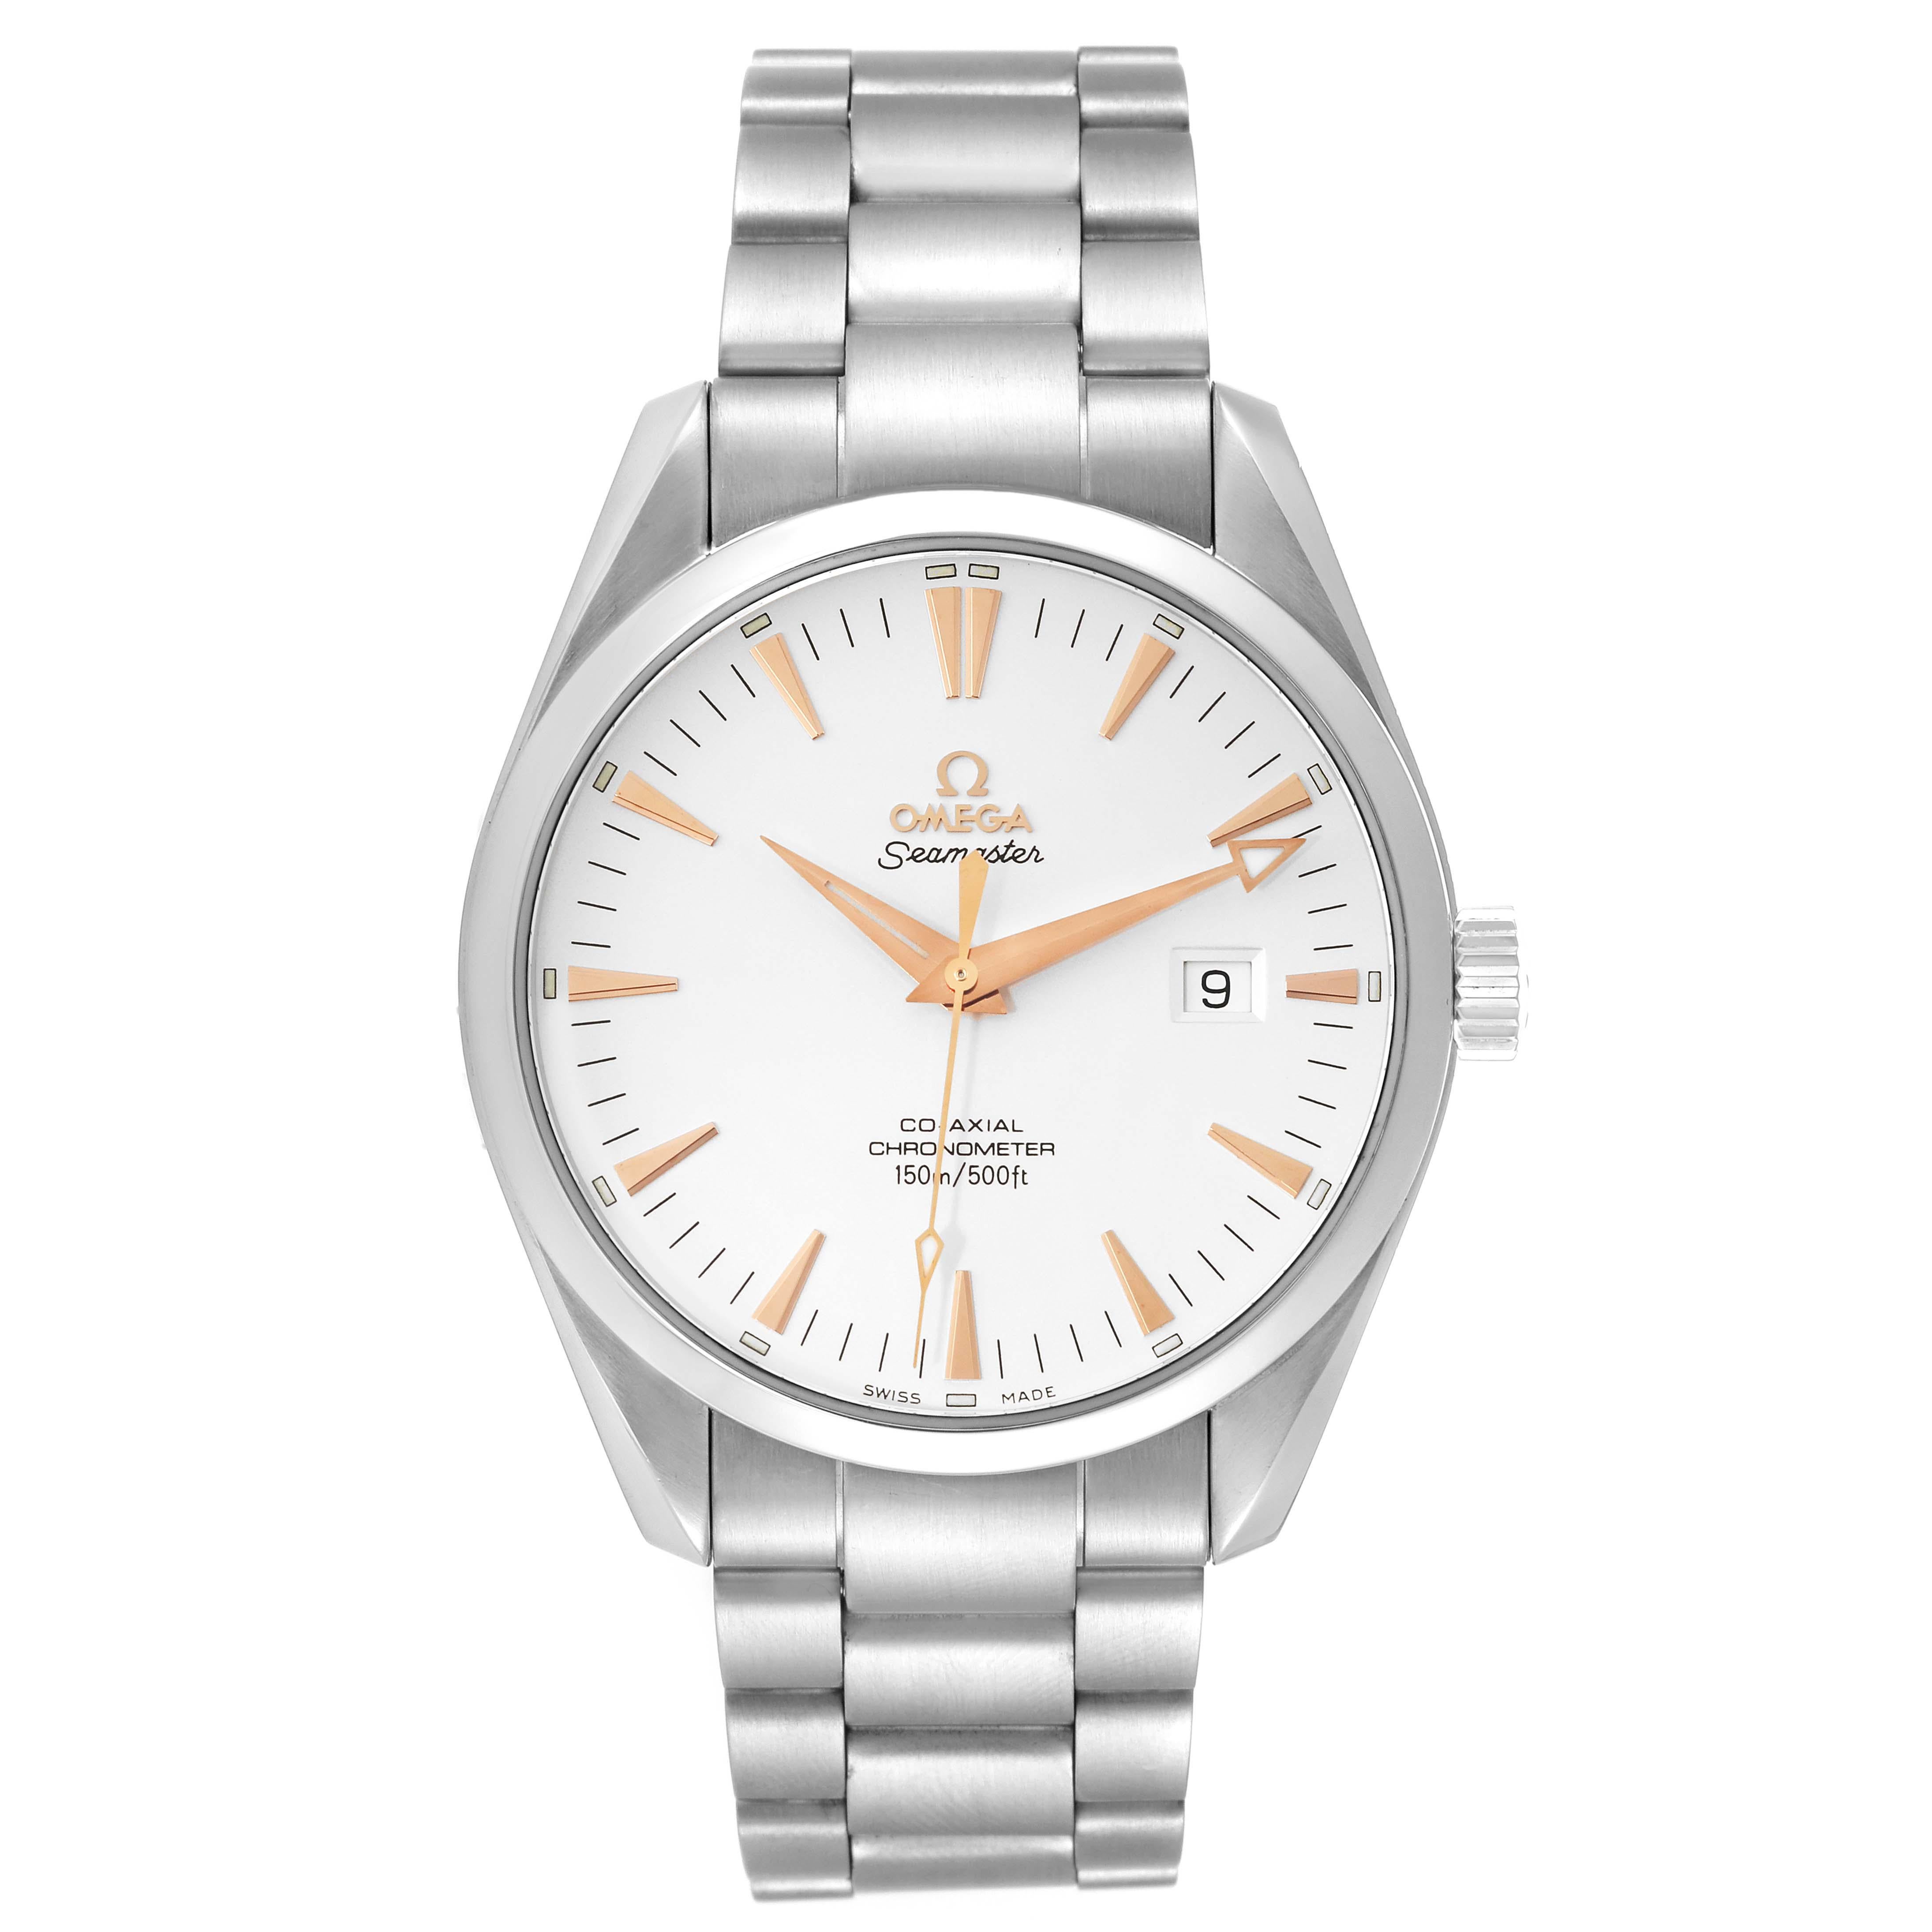 Omega Seamaster Aqua Terra Silver Dial Steel Mens Watch 2502.34.00 Box Card. Automatic self-winding movement. Stainless steel round case 42.2 mm in diameter. Transparent exhibition sapphire crystal caseback. Stainless steel bezel. Scratch resistant